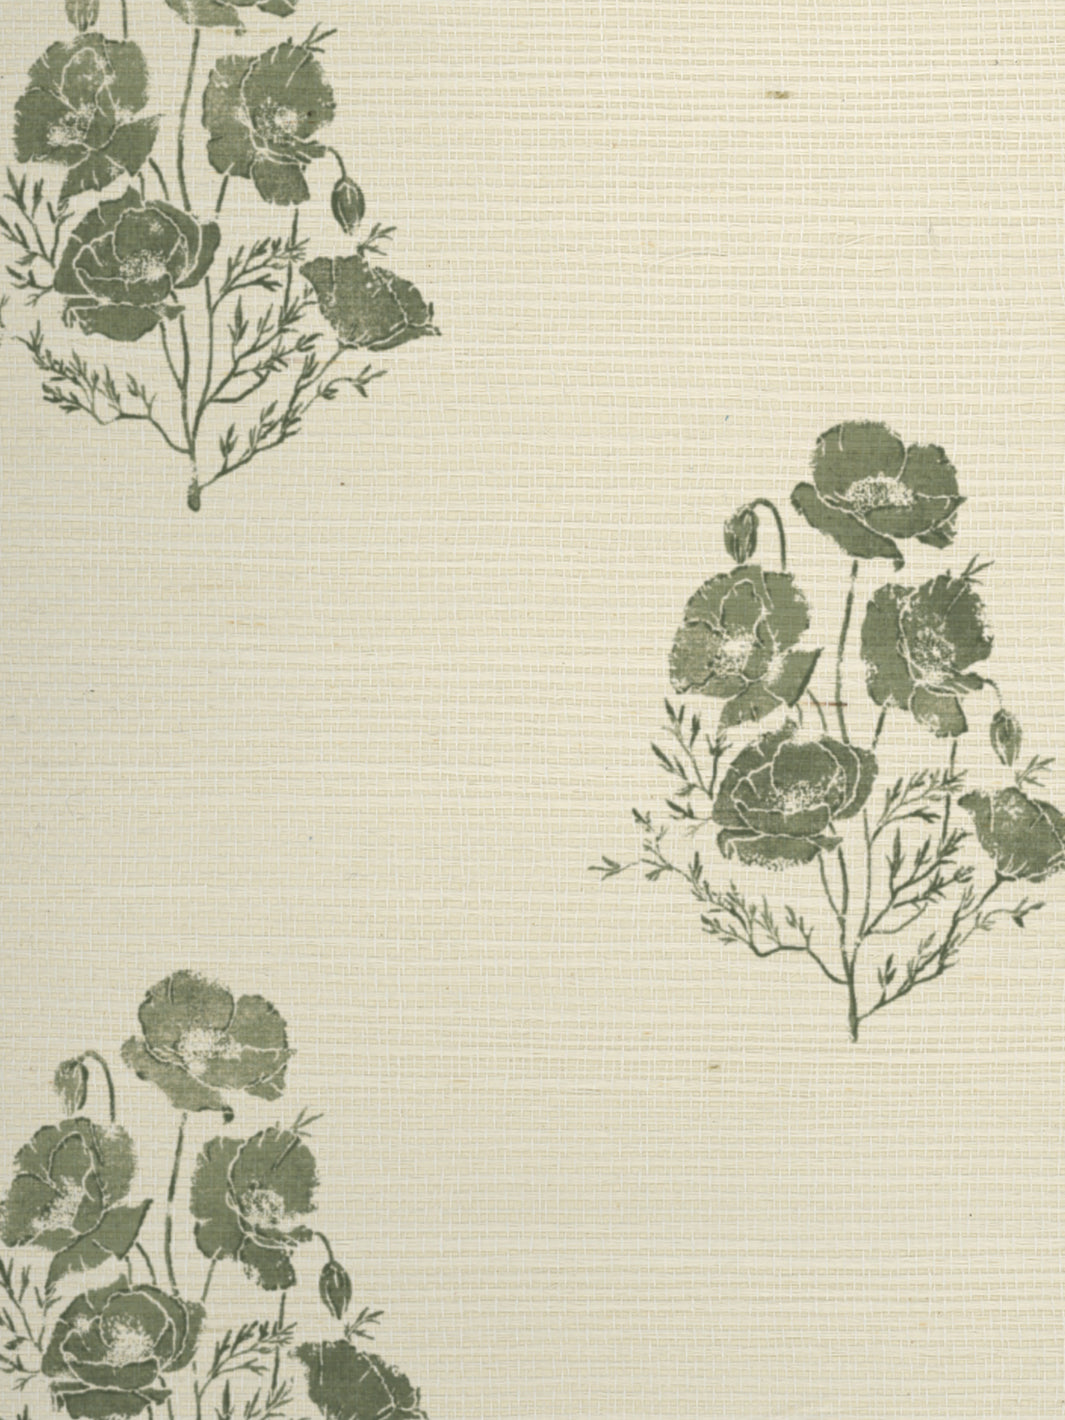 'California Poppy' Grasscloth Wallpaper by Nathan Turner - Green